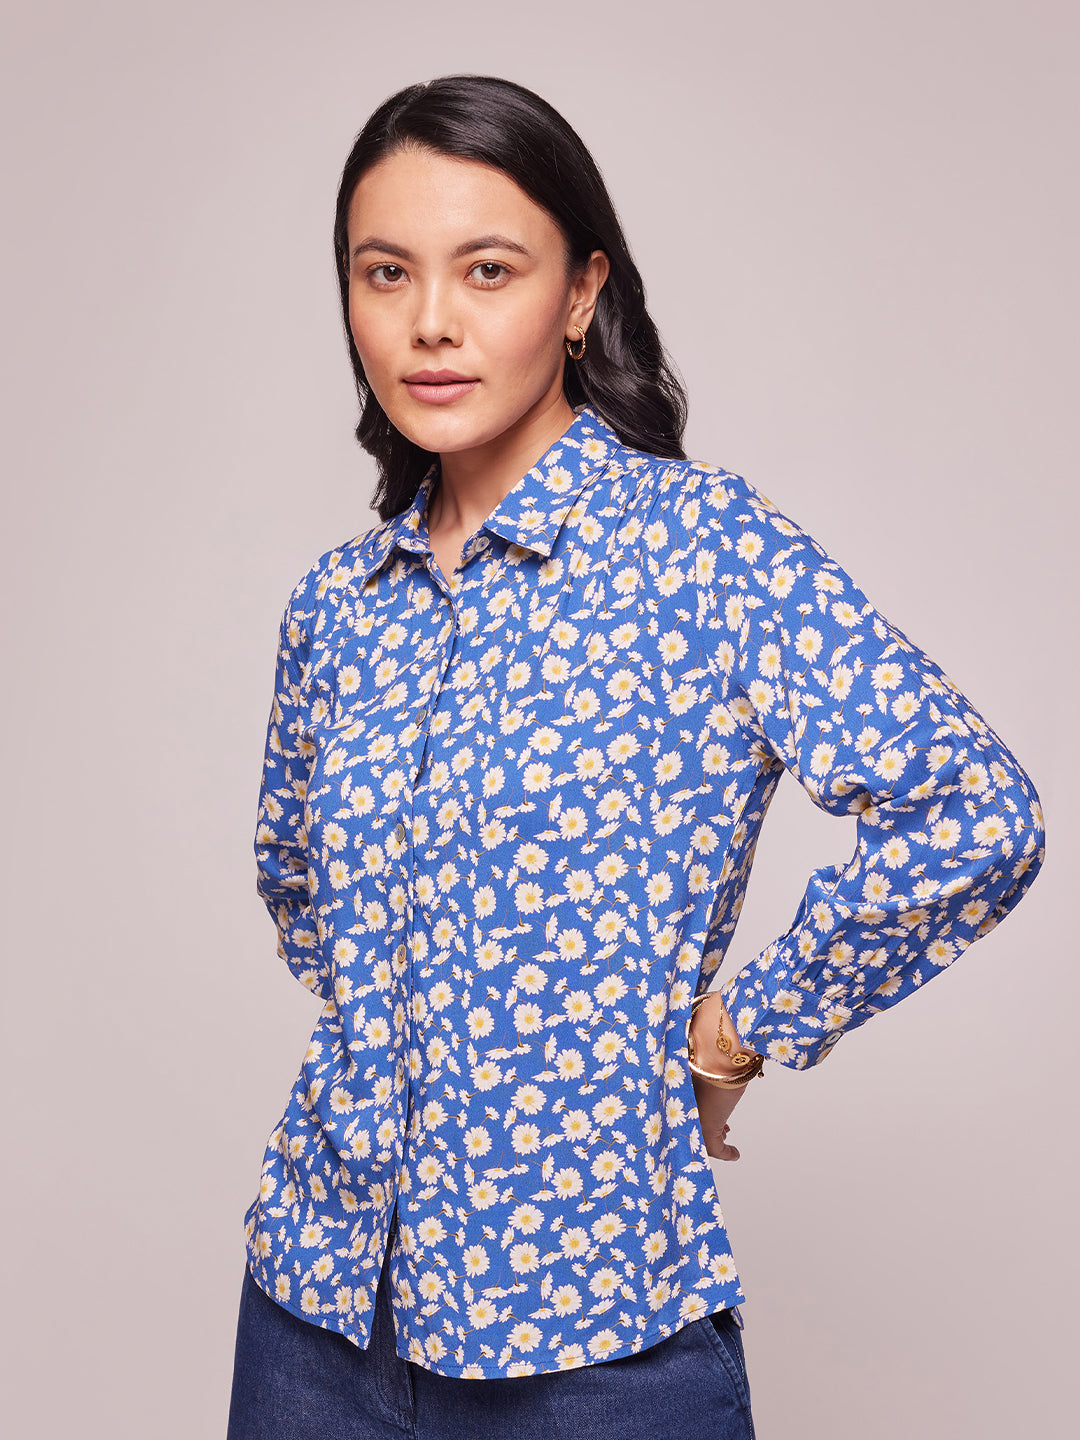 Bombay High Women's Lapis Blue Full Sleeve Floral Print Relaxed Fit Shirt